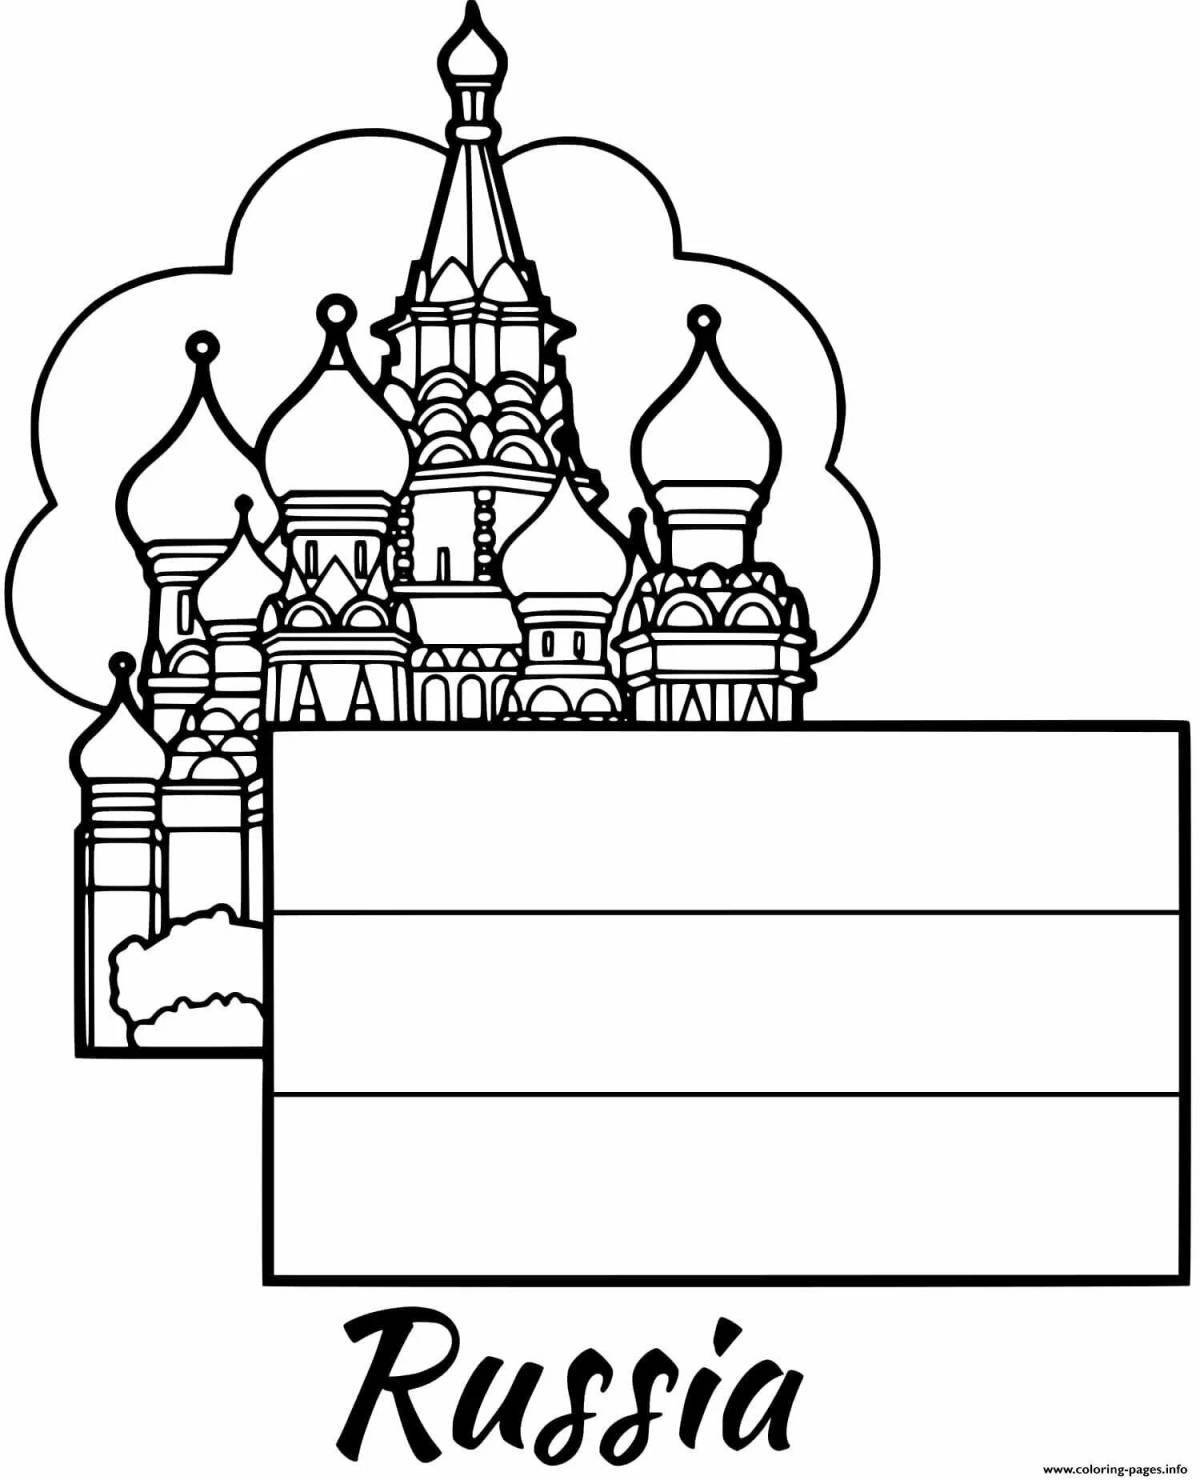 Coloring page elegant day of russia